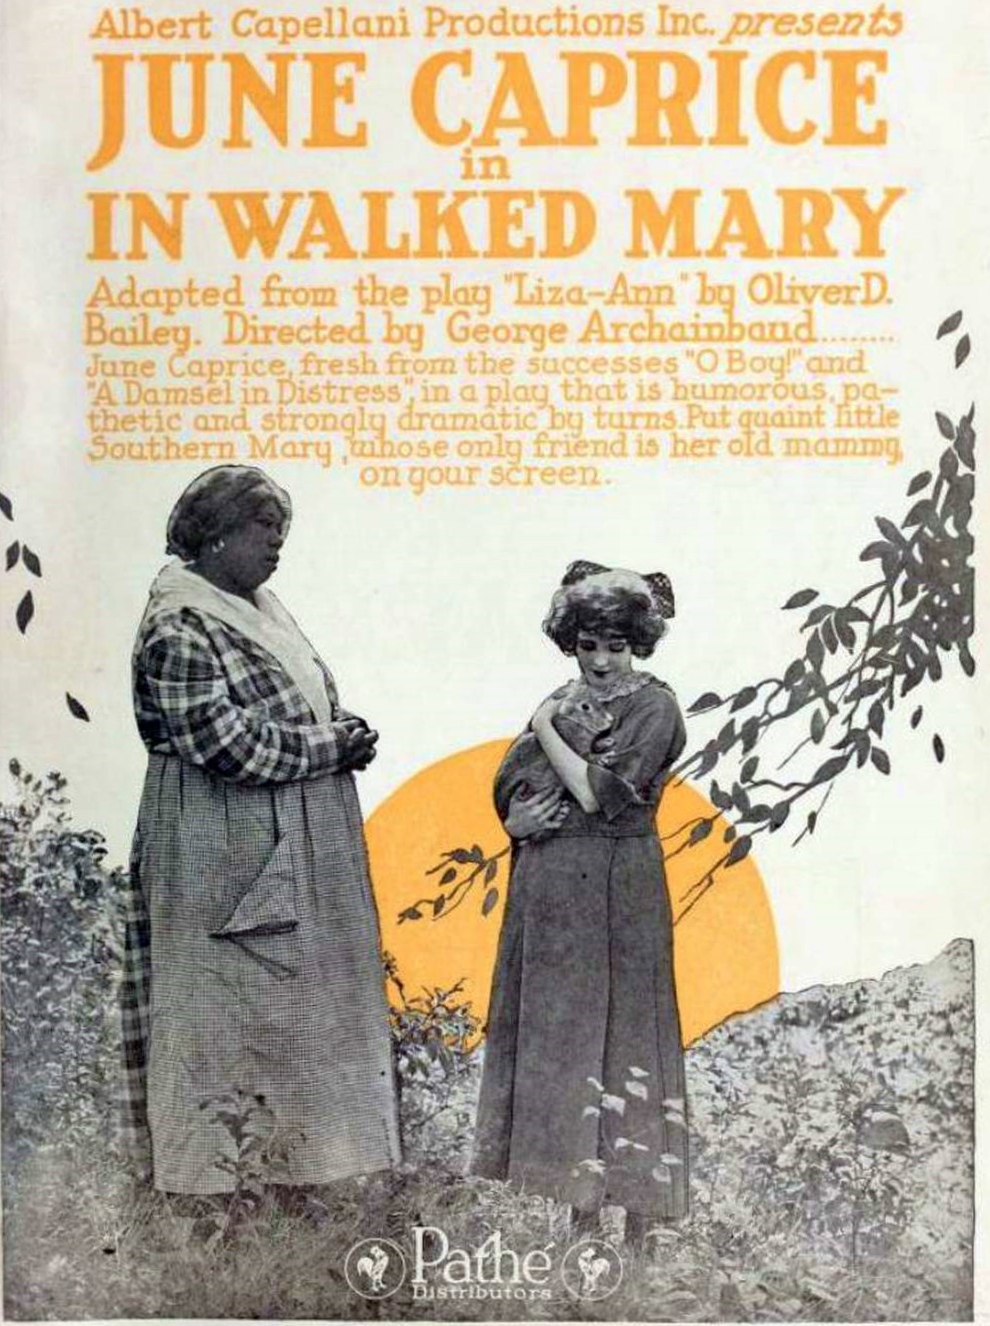 In Walked Mary